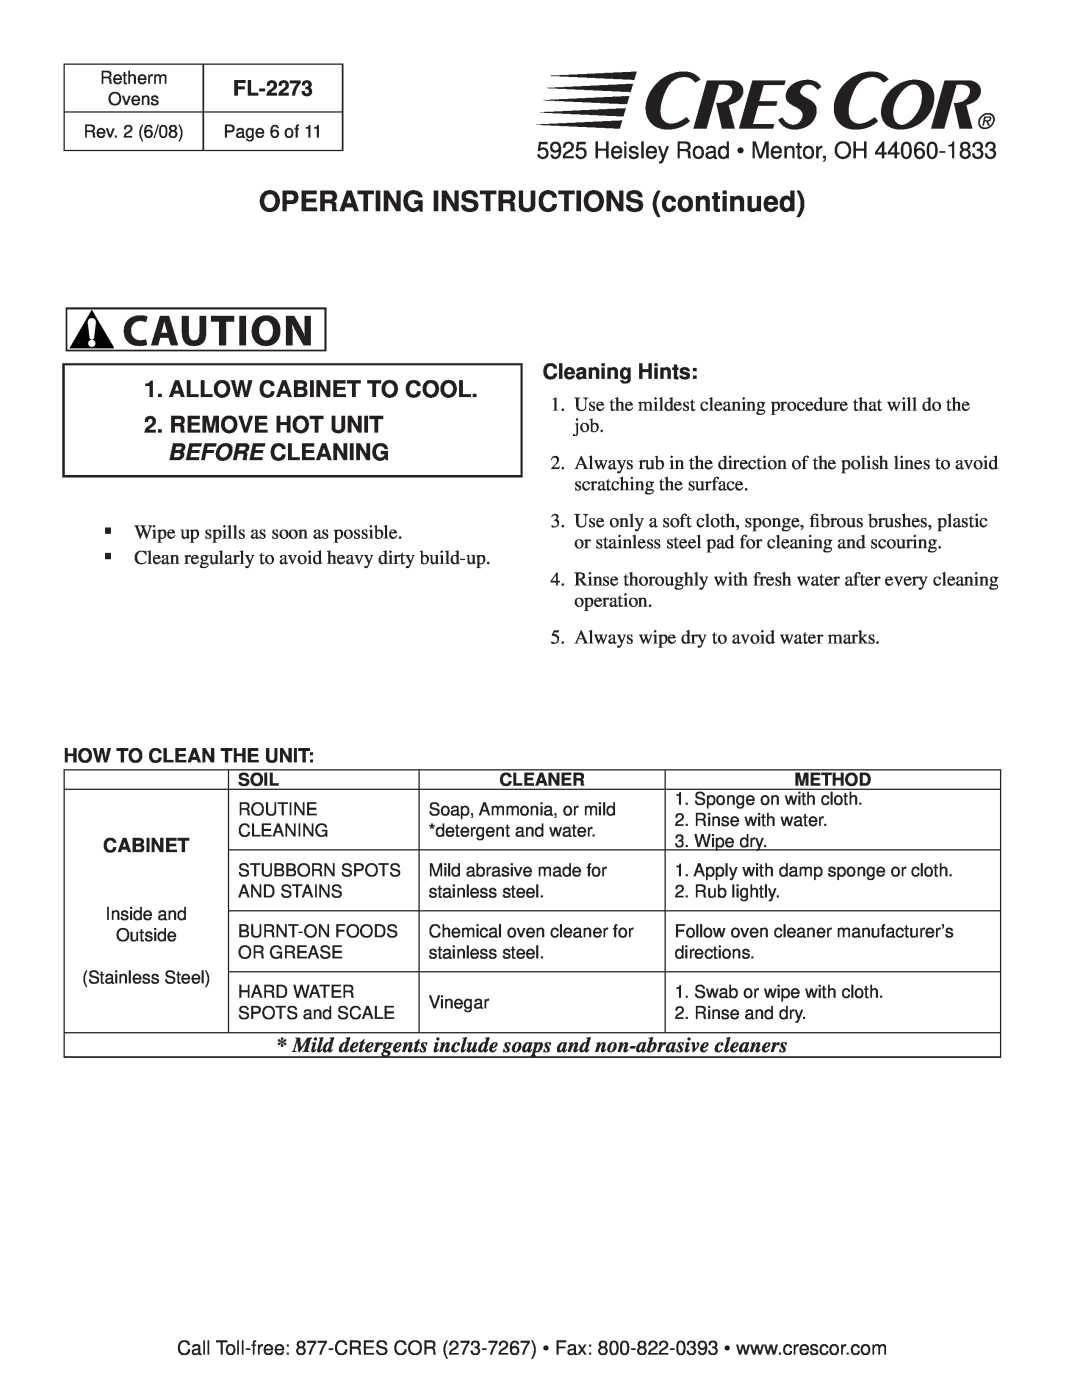 Cres Cor RR-1332 OPERATING INSTRUCTIONS continued, Heisley Road Mentor, OH, Cleaning Hints, FL-2273, How To Clean The Unit 